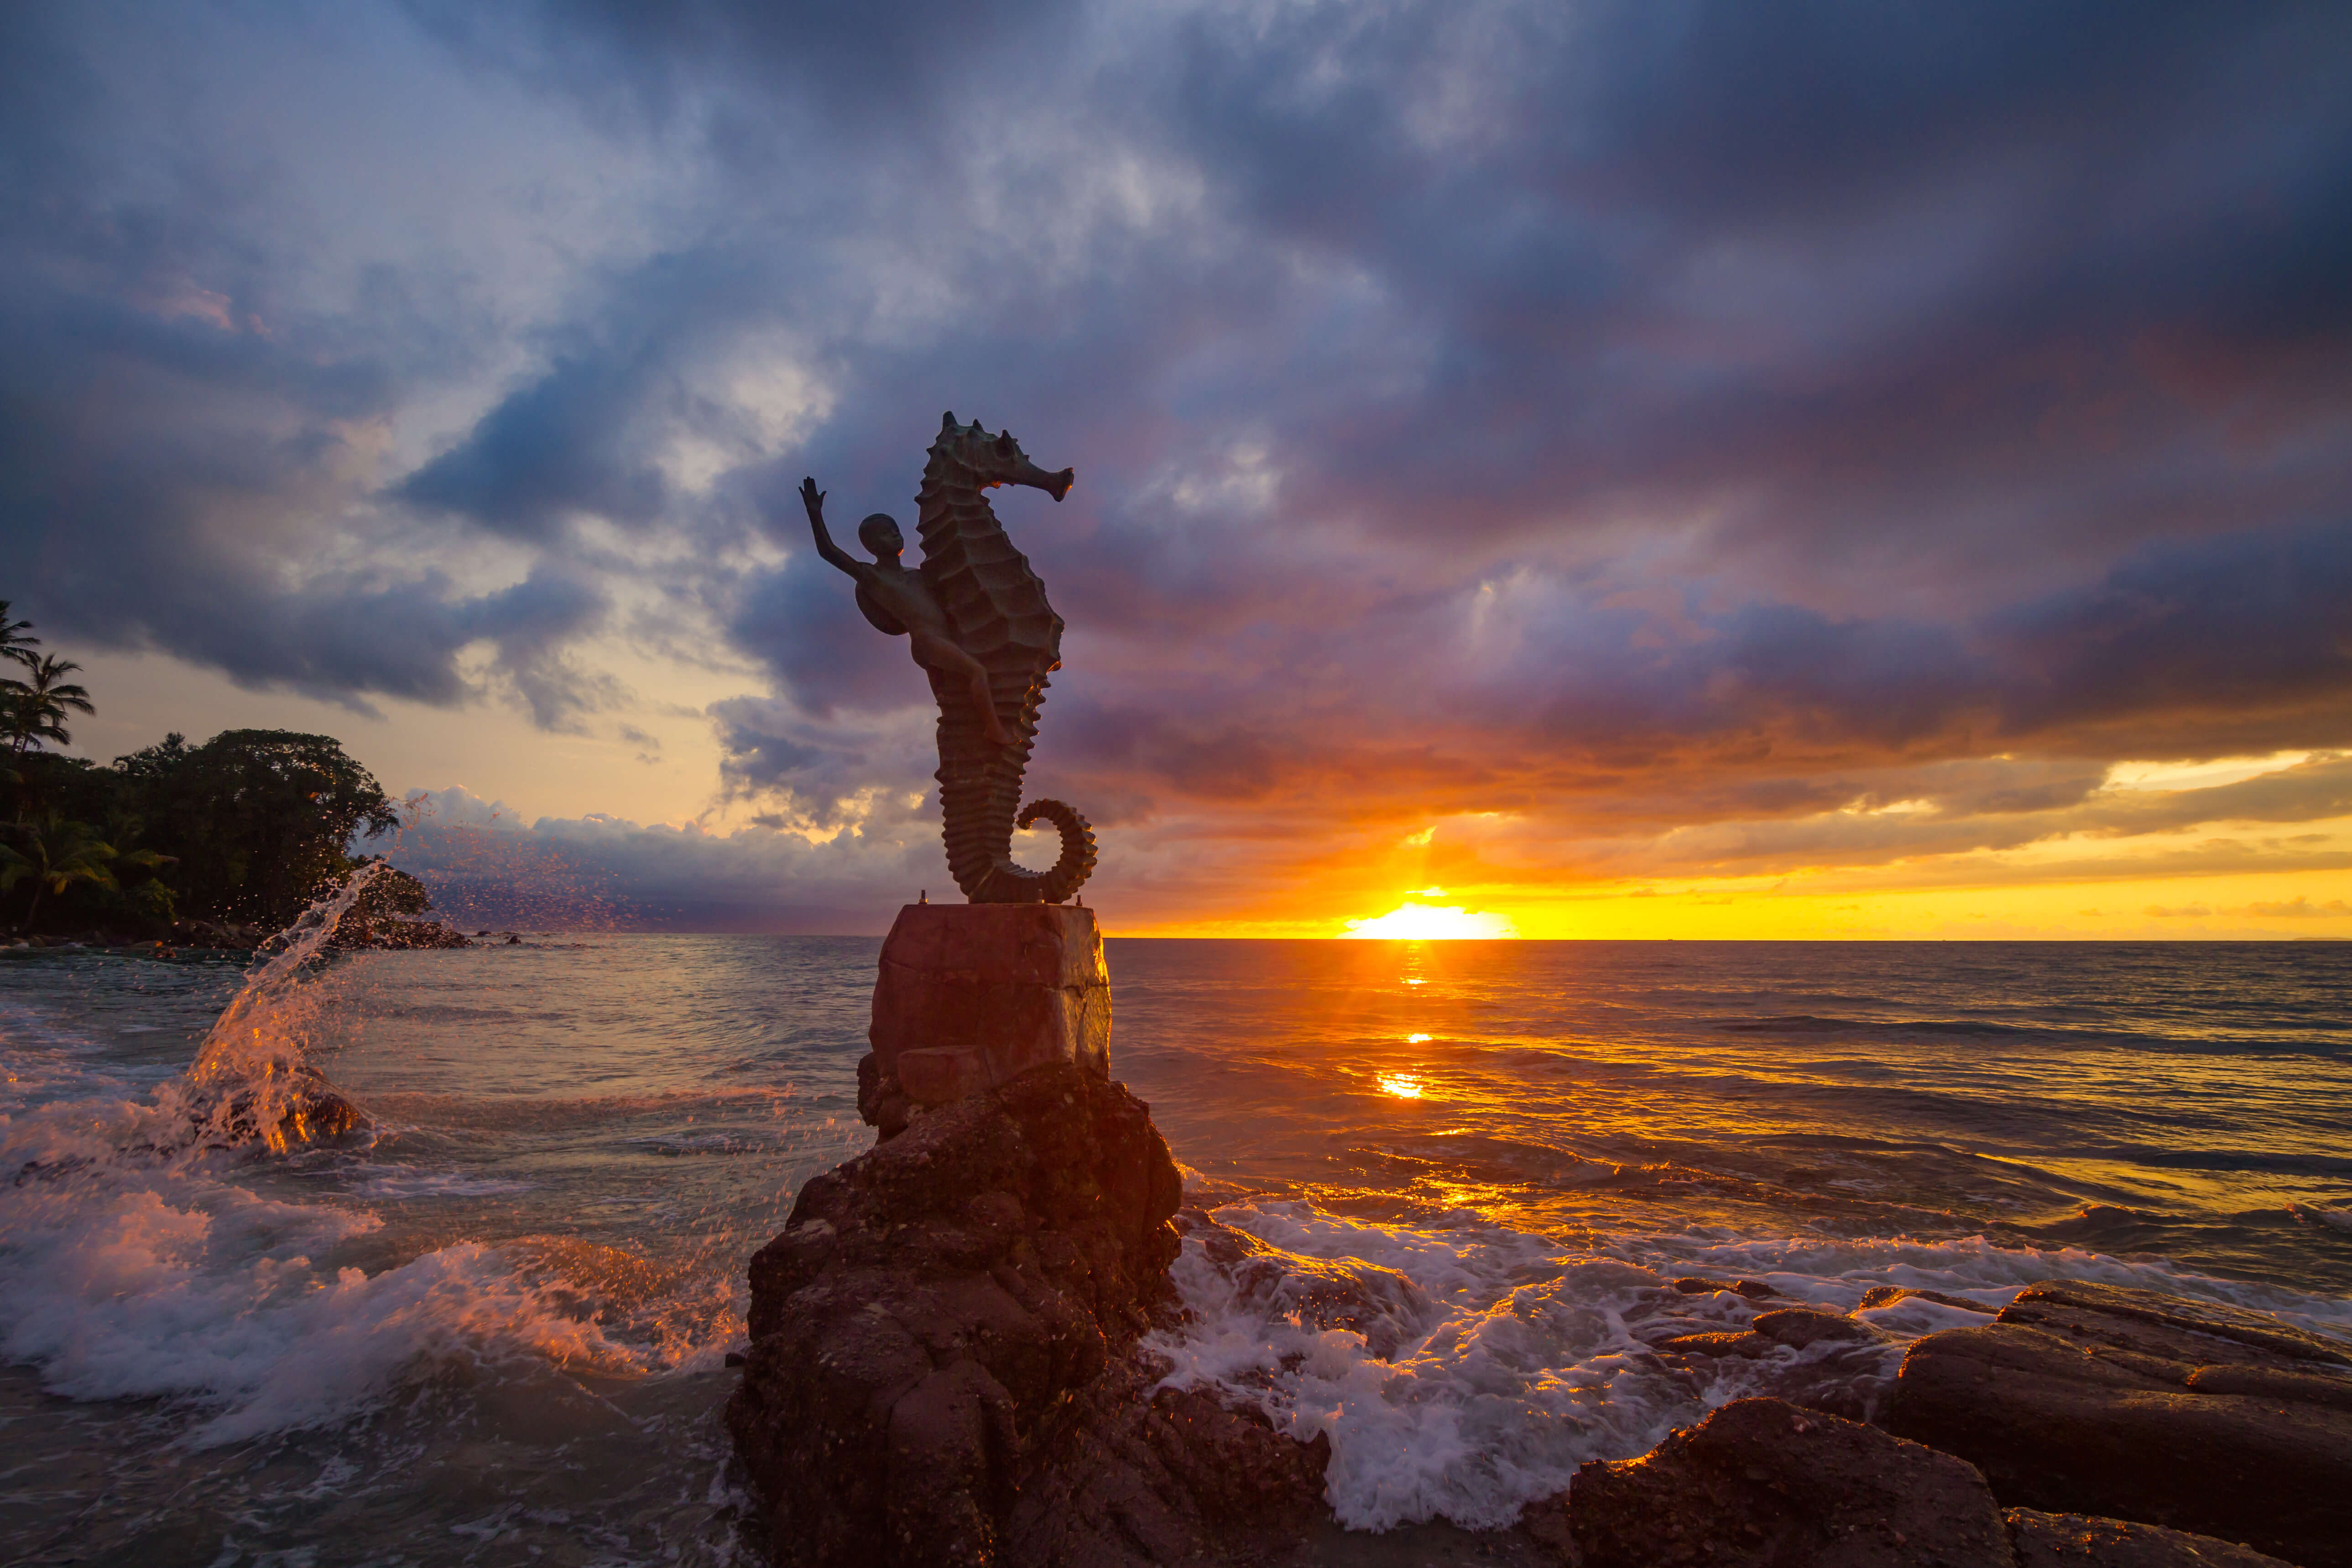 Sunset with a seahorse statue on a rock